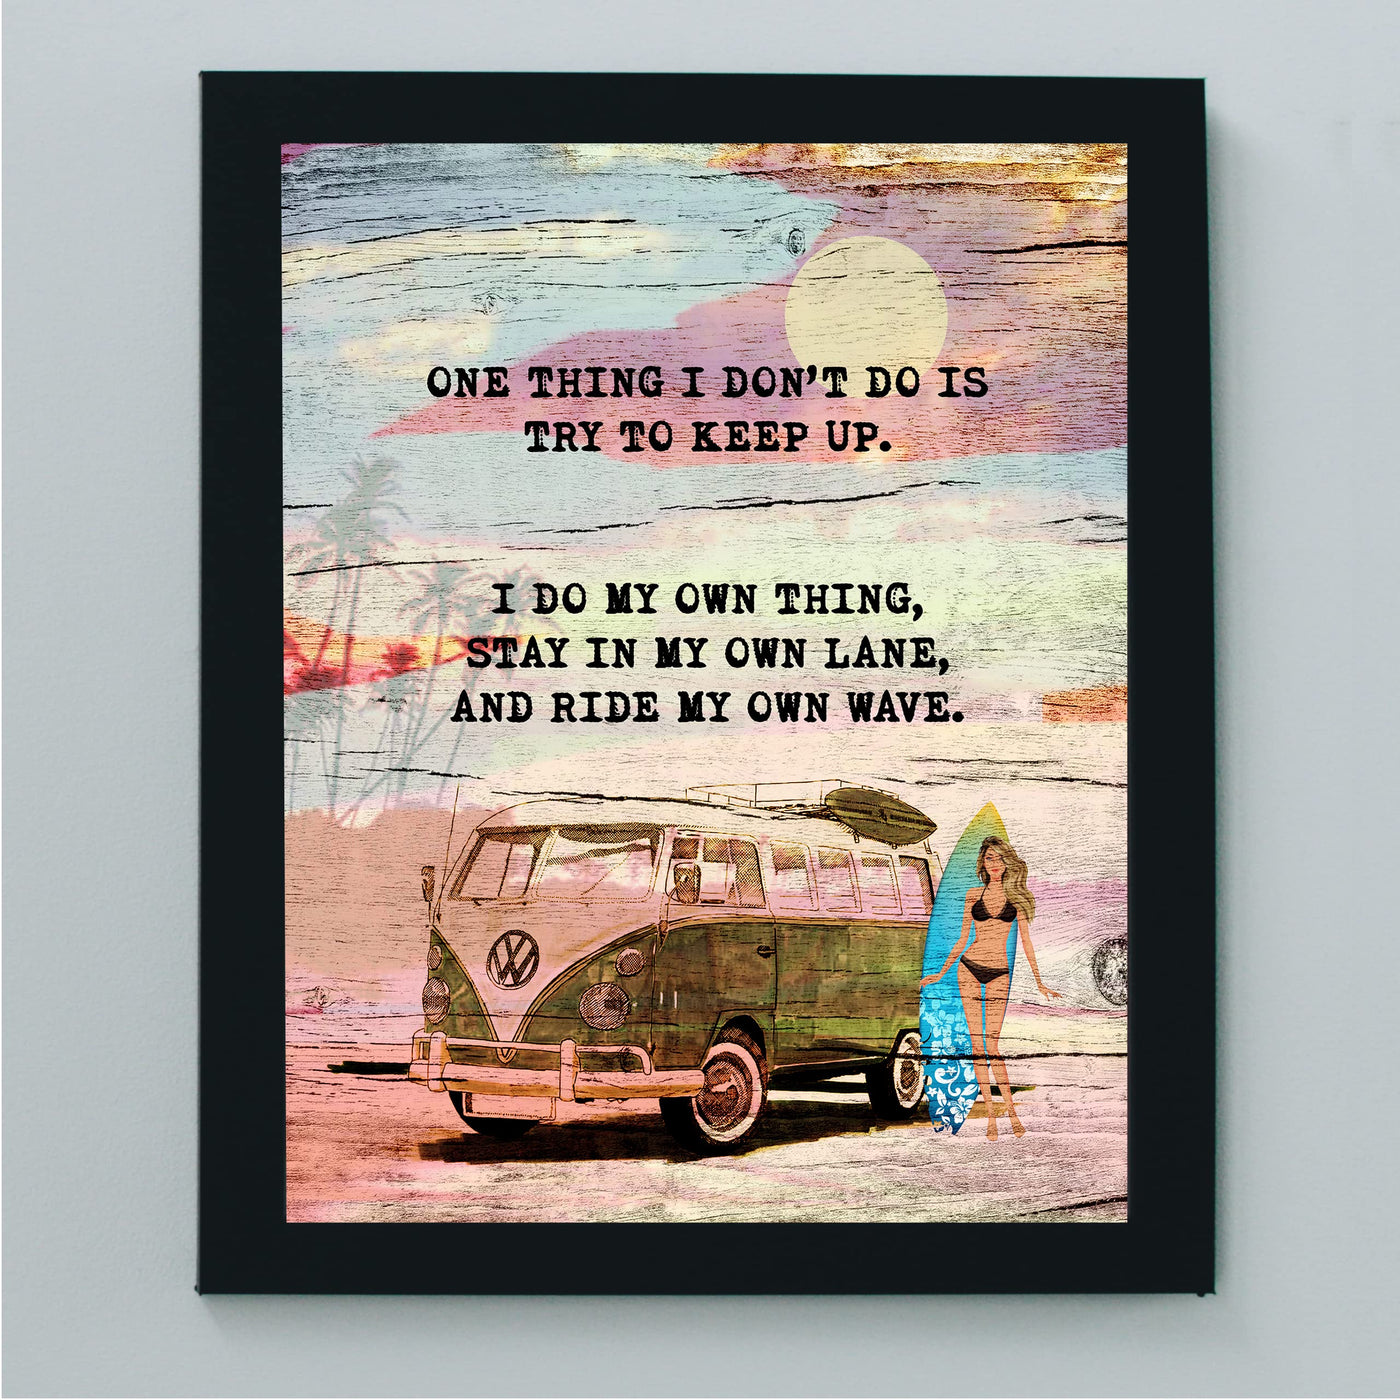 One Thing I Do-Ride My Own Wave Fun Beach Themed Sign-8 x 10" Retro Van w/Surfer Girl Wall Art Print-Ready to Frame. Rustic Wood Design. Home-Beach House-Ocean Theme Decor. Printed on Photo Paper.